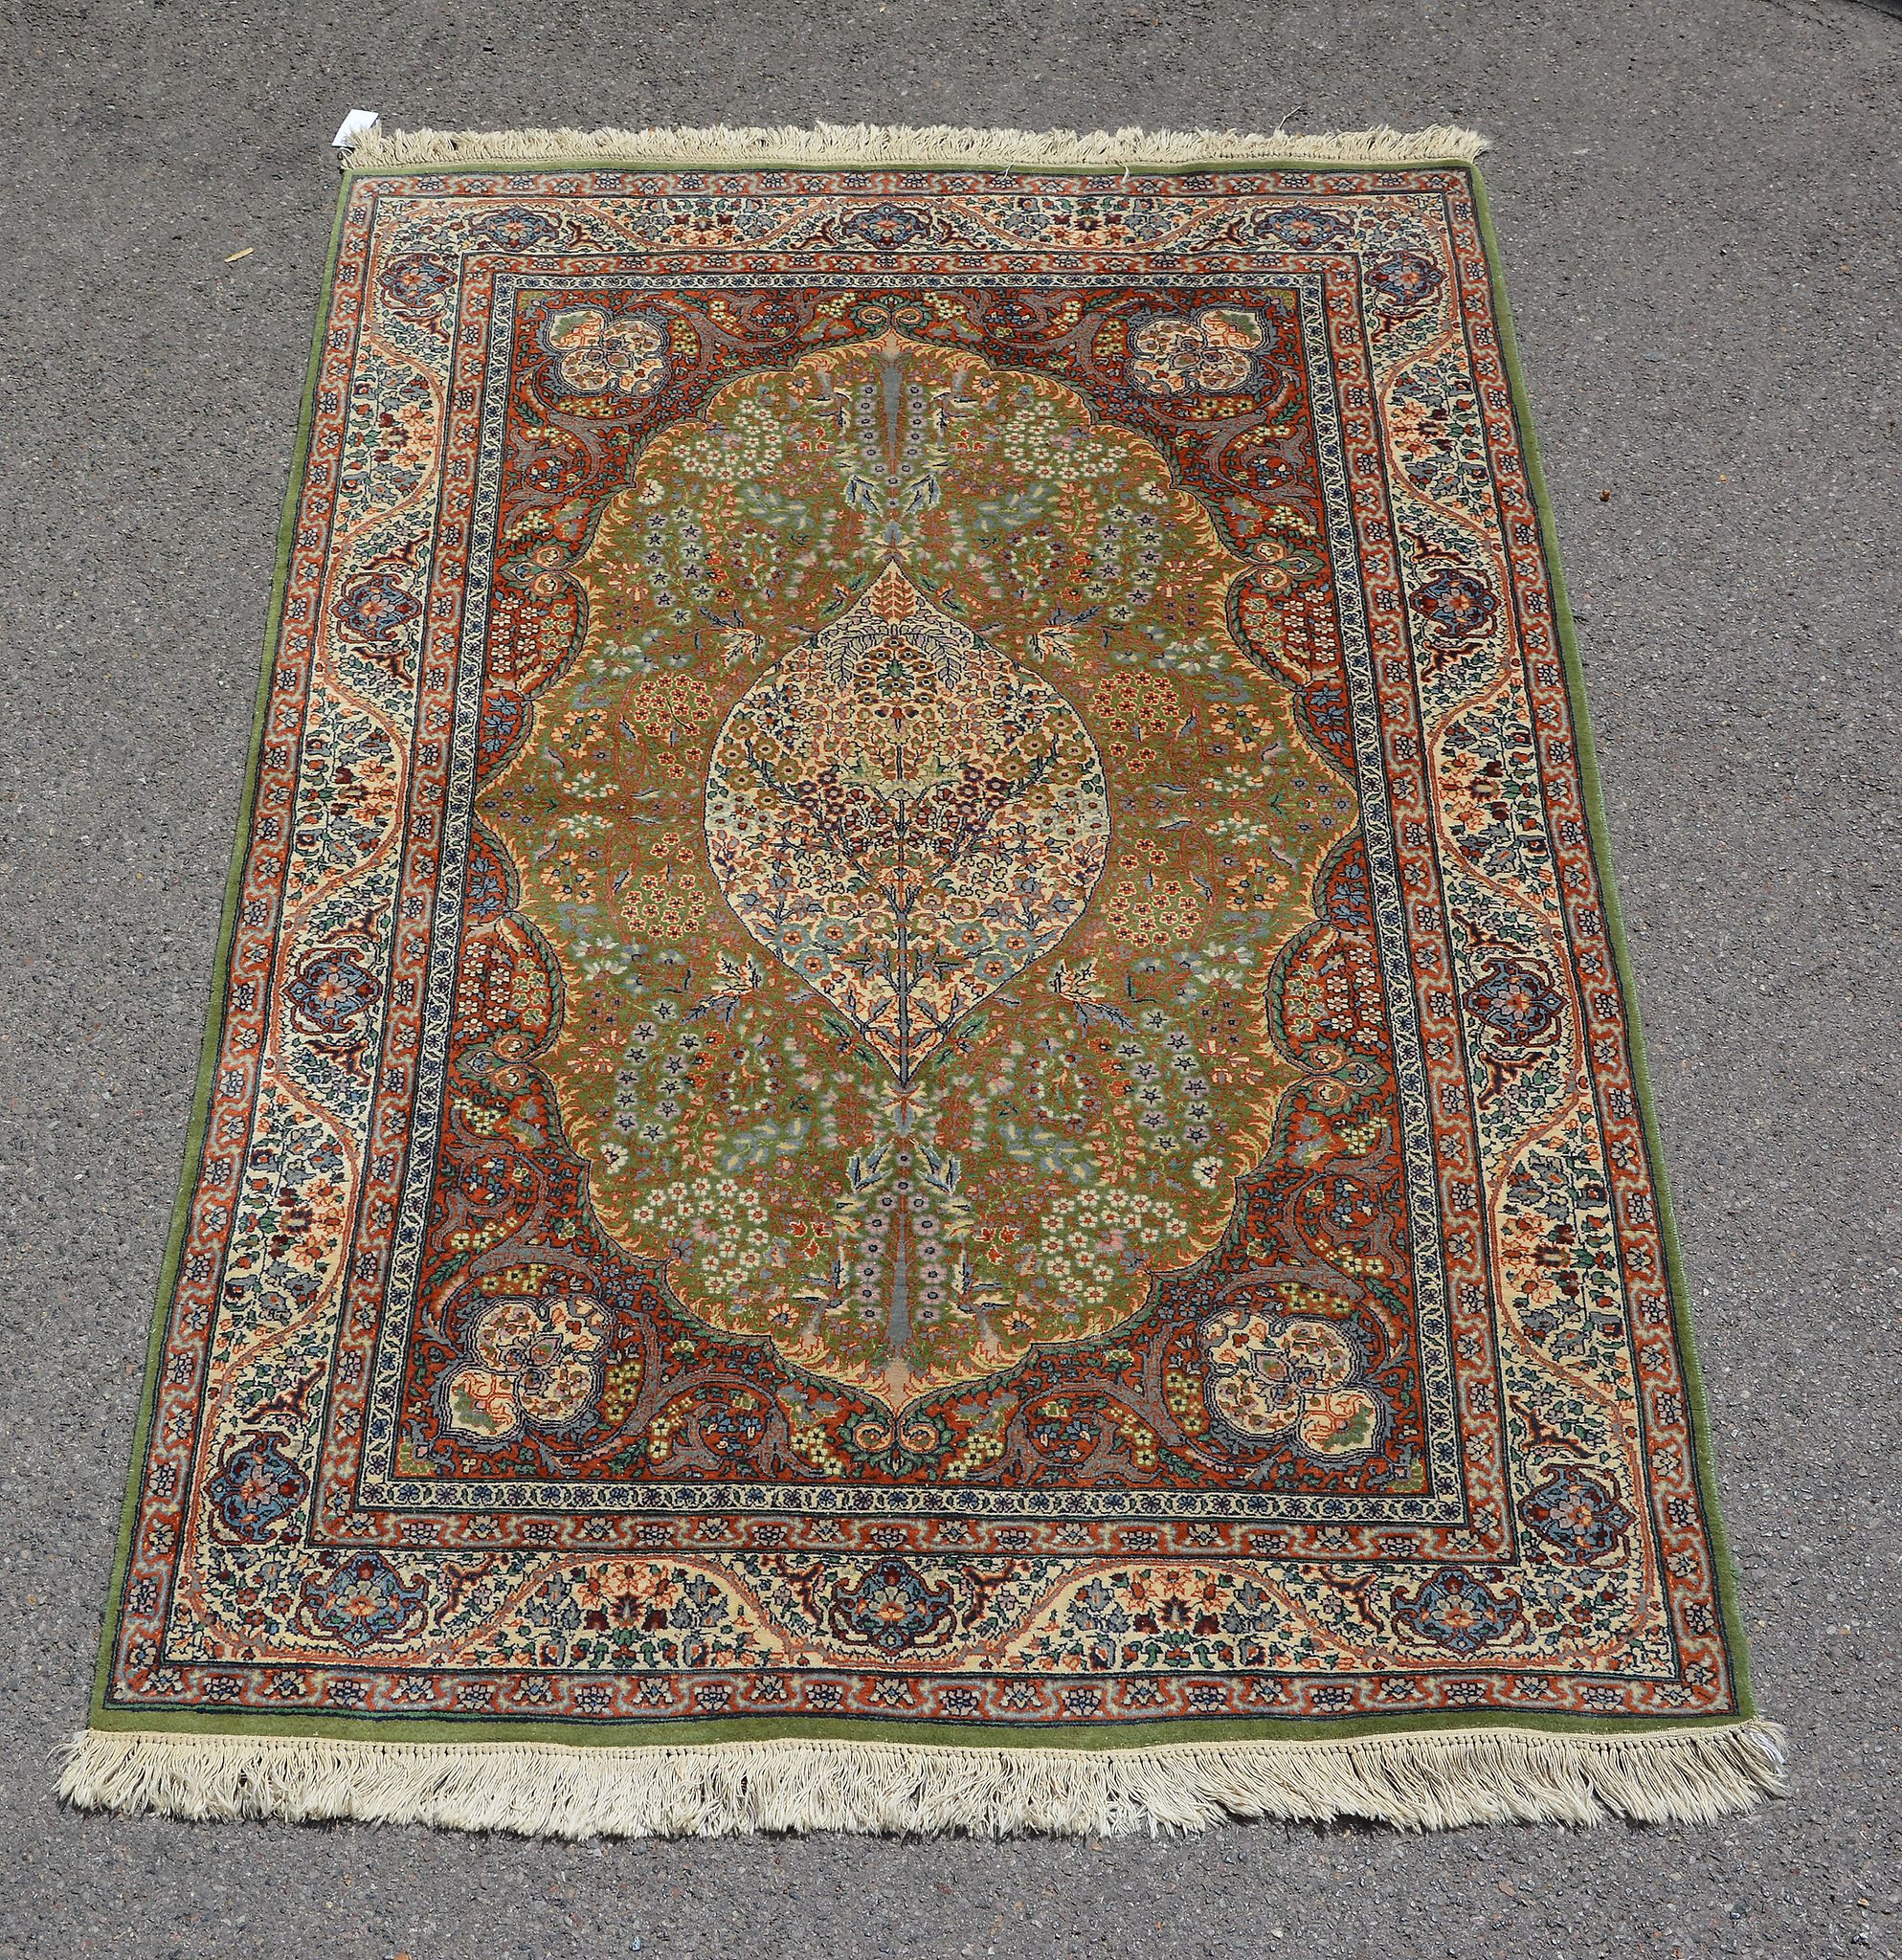 A woven rug, of Kashan design, the green field, medallion and spandrels decorated profusely with